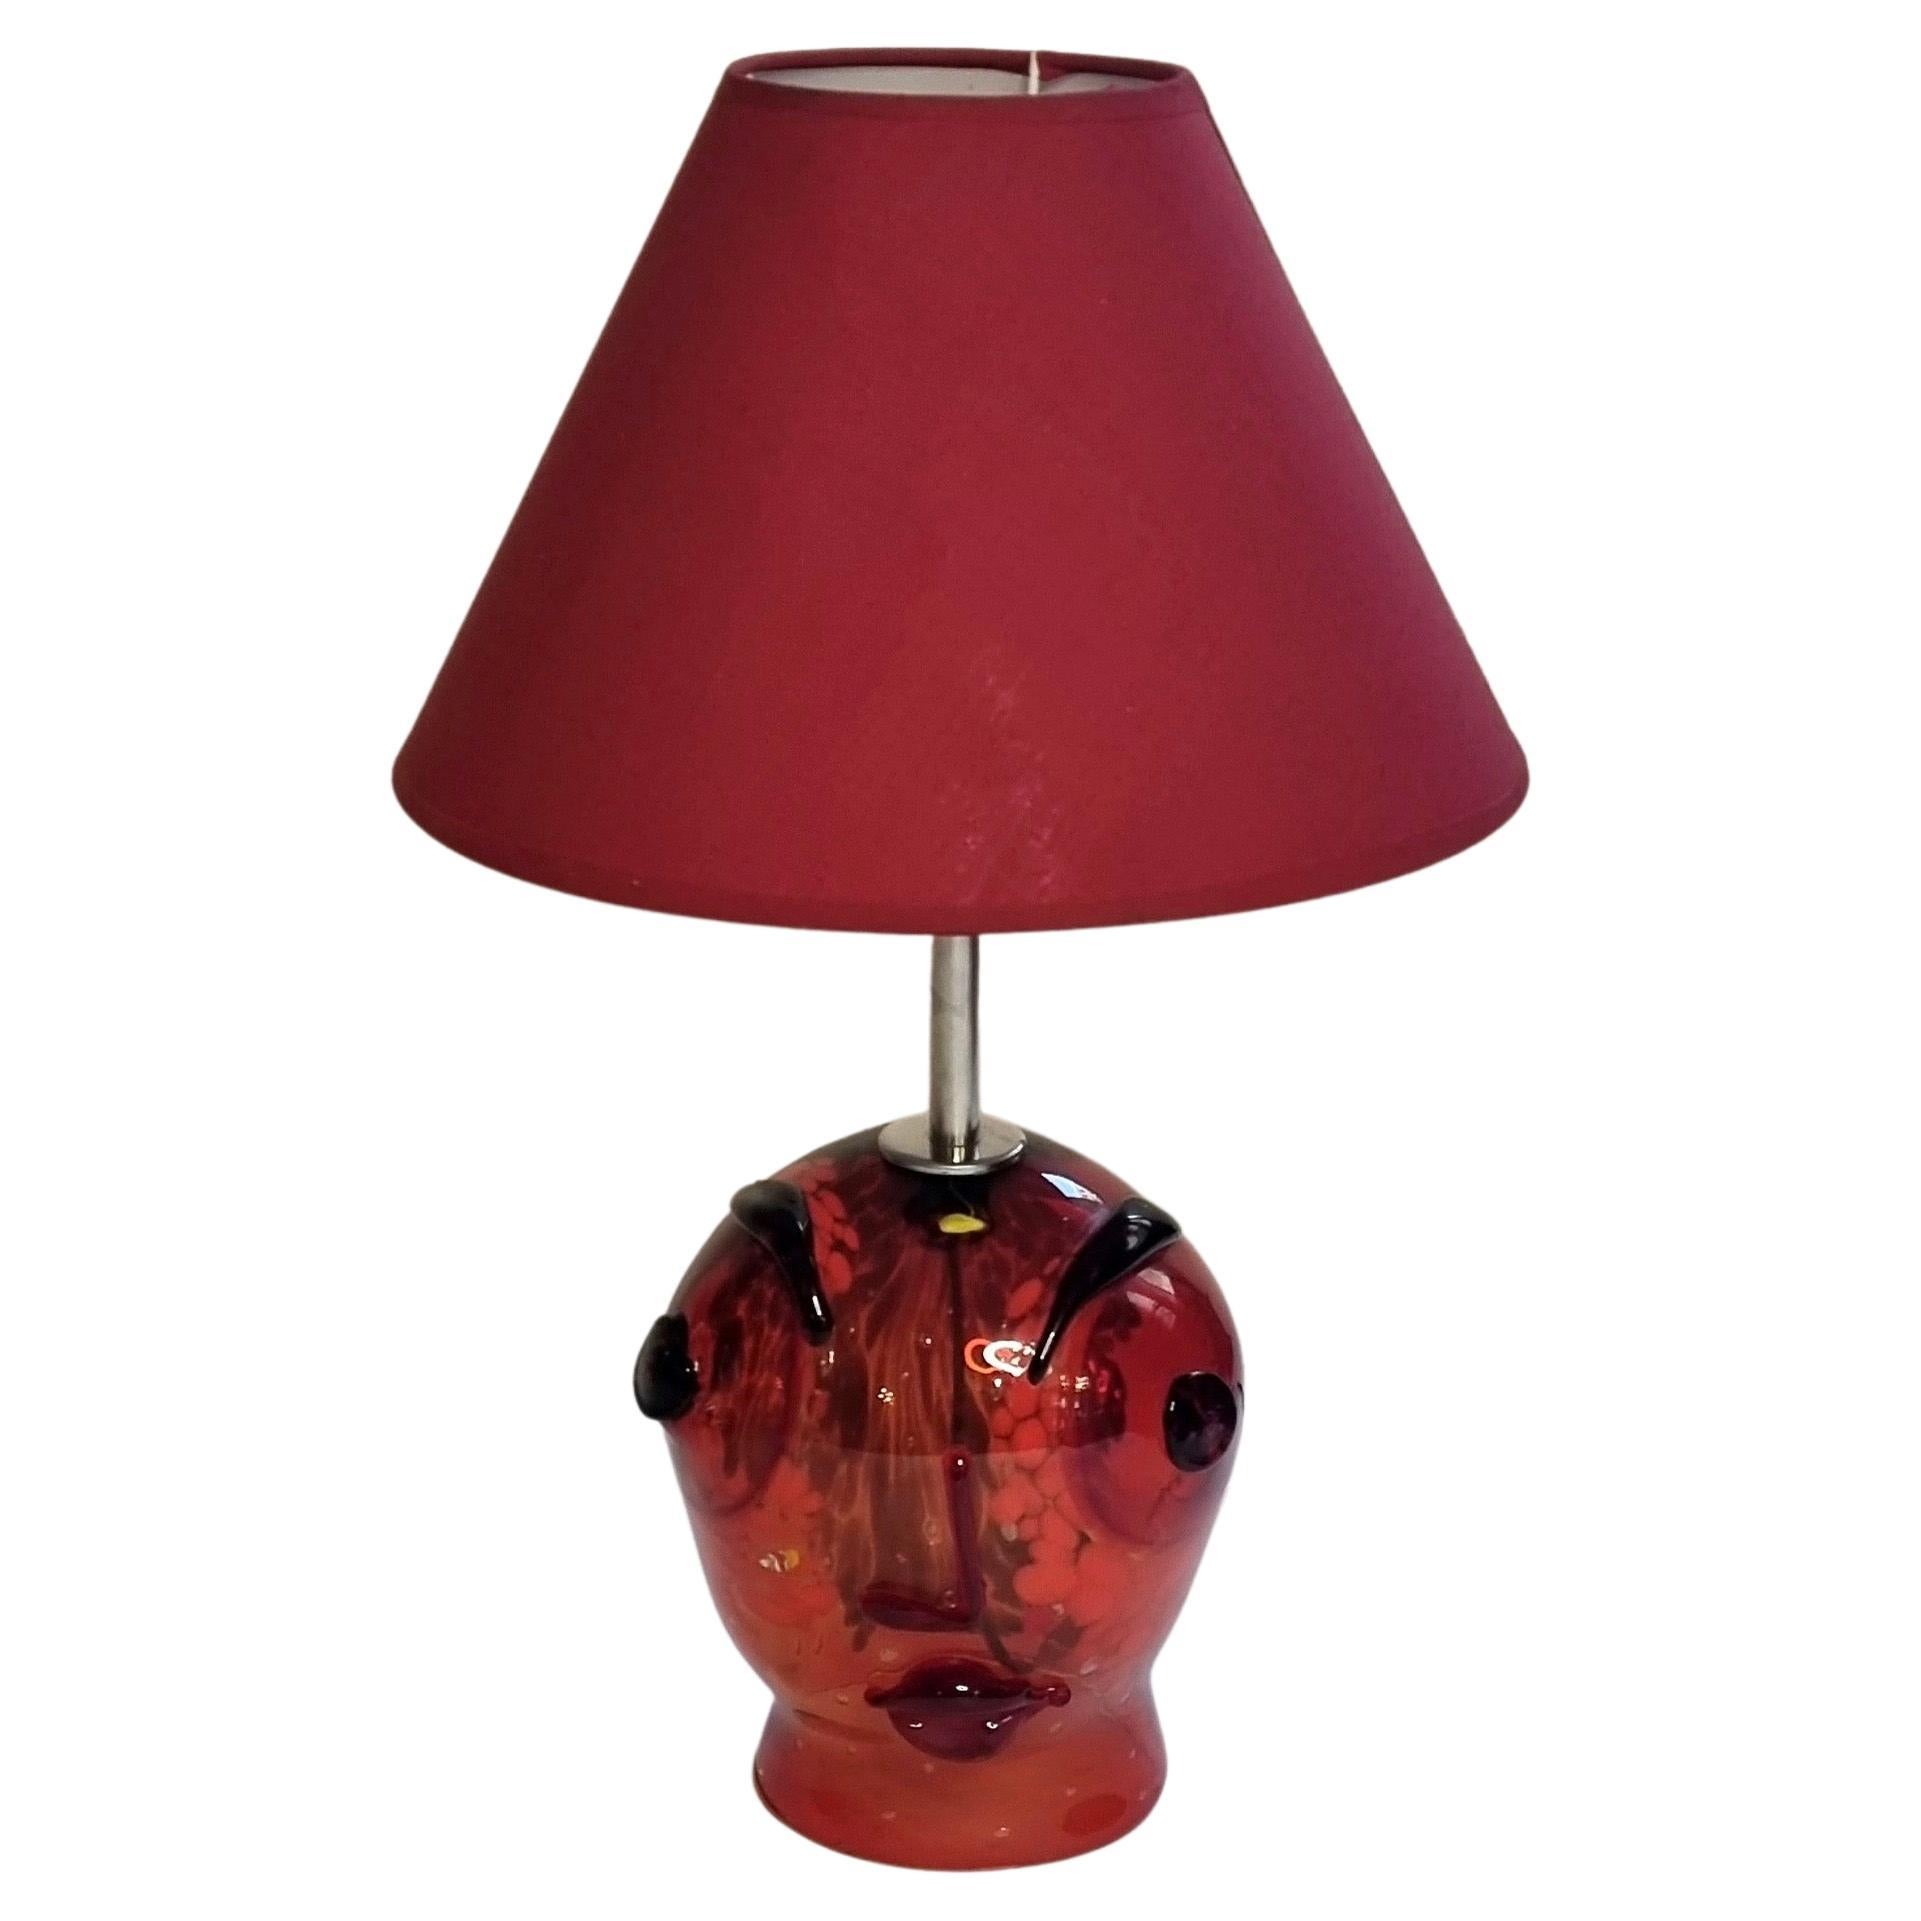 In this listing you will find a gorgeous multi-colored Murano Art Glass table lamp, designed in celebration of Picasso. Manufactured by Murano 5 Studio (attr.), this lamp is one of the hard-to-find pieces and a true delight to collectors of modern